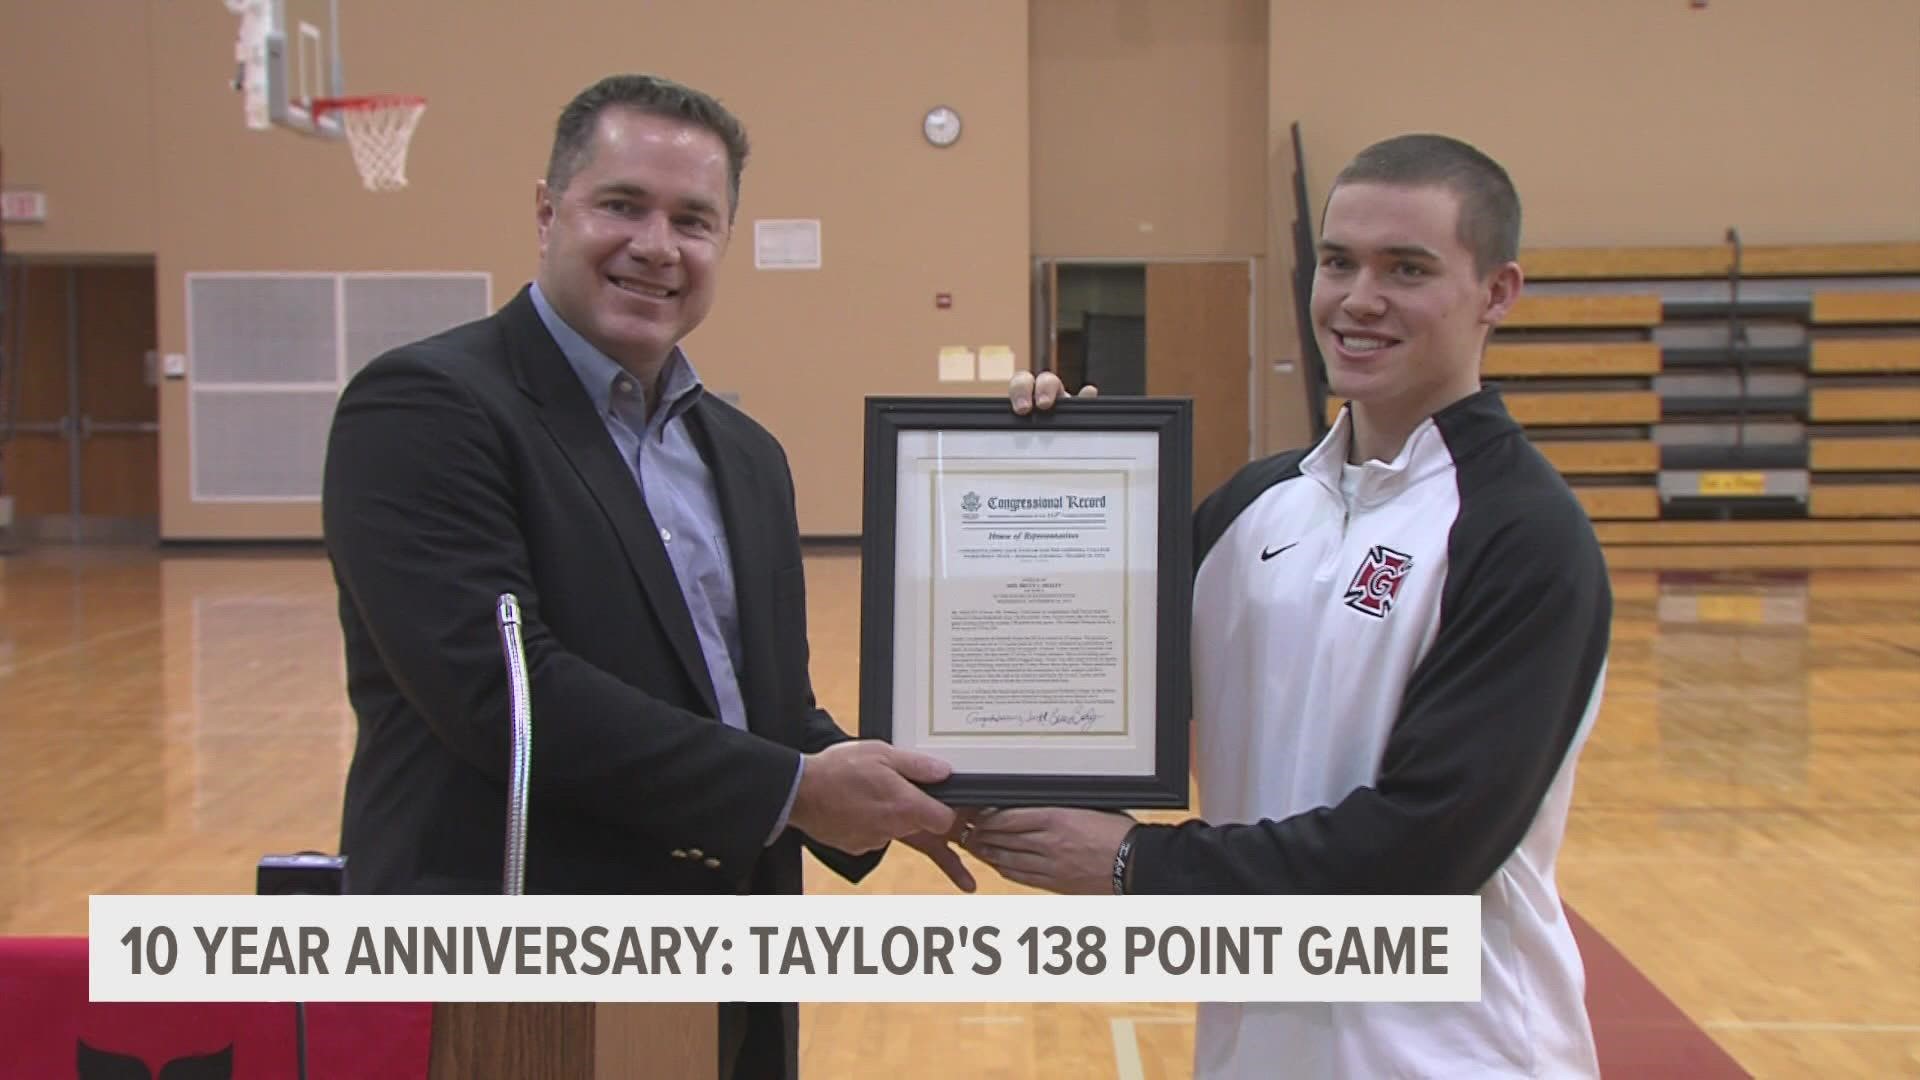 Ten years ago, Jack Taylor made history, scoring 138 points in a game against Faith Baptist Bible College.